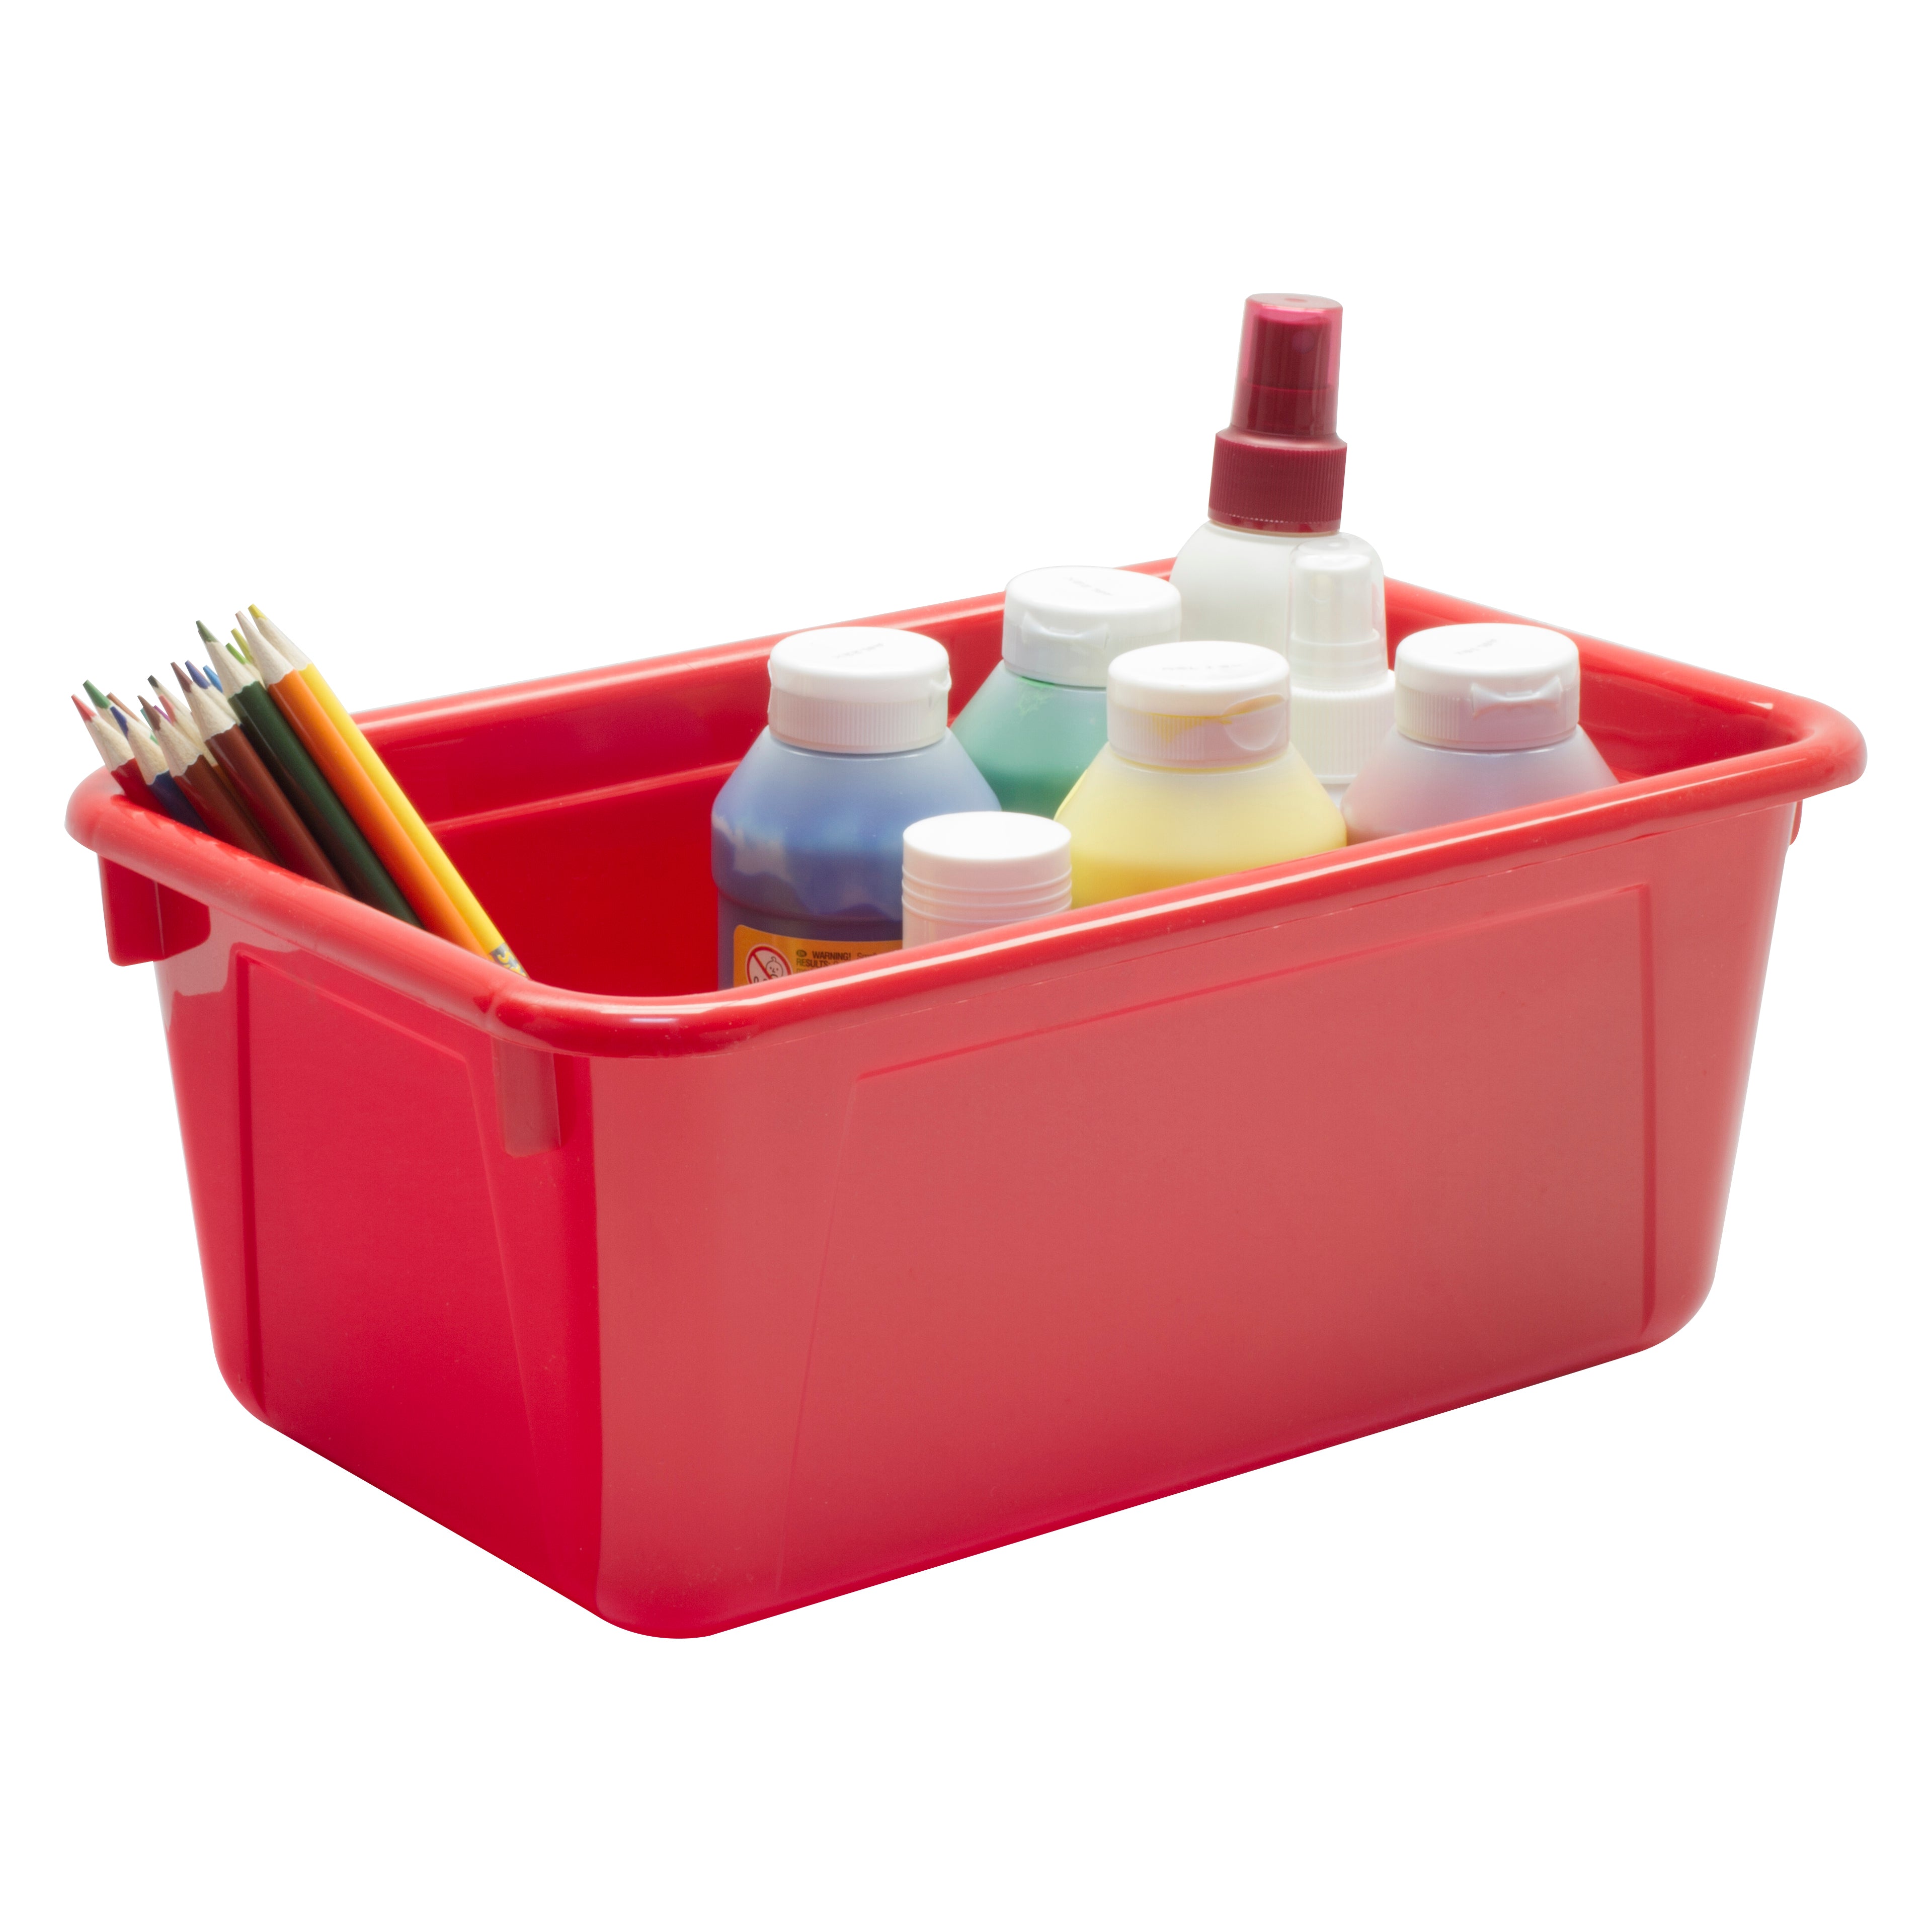 Storex Small Cubby Bin, Red, 5-Pack